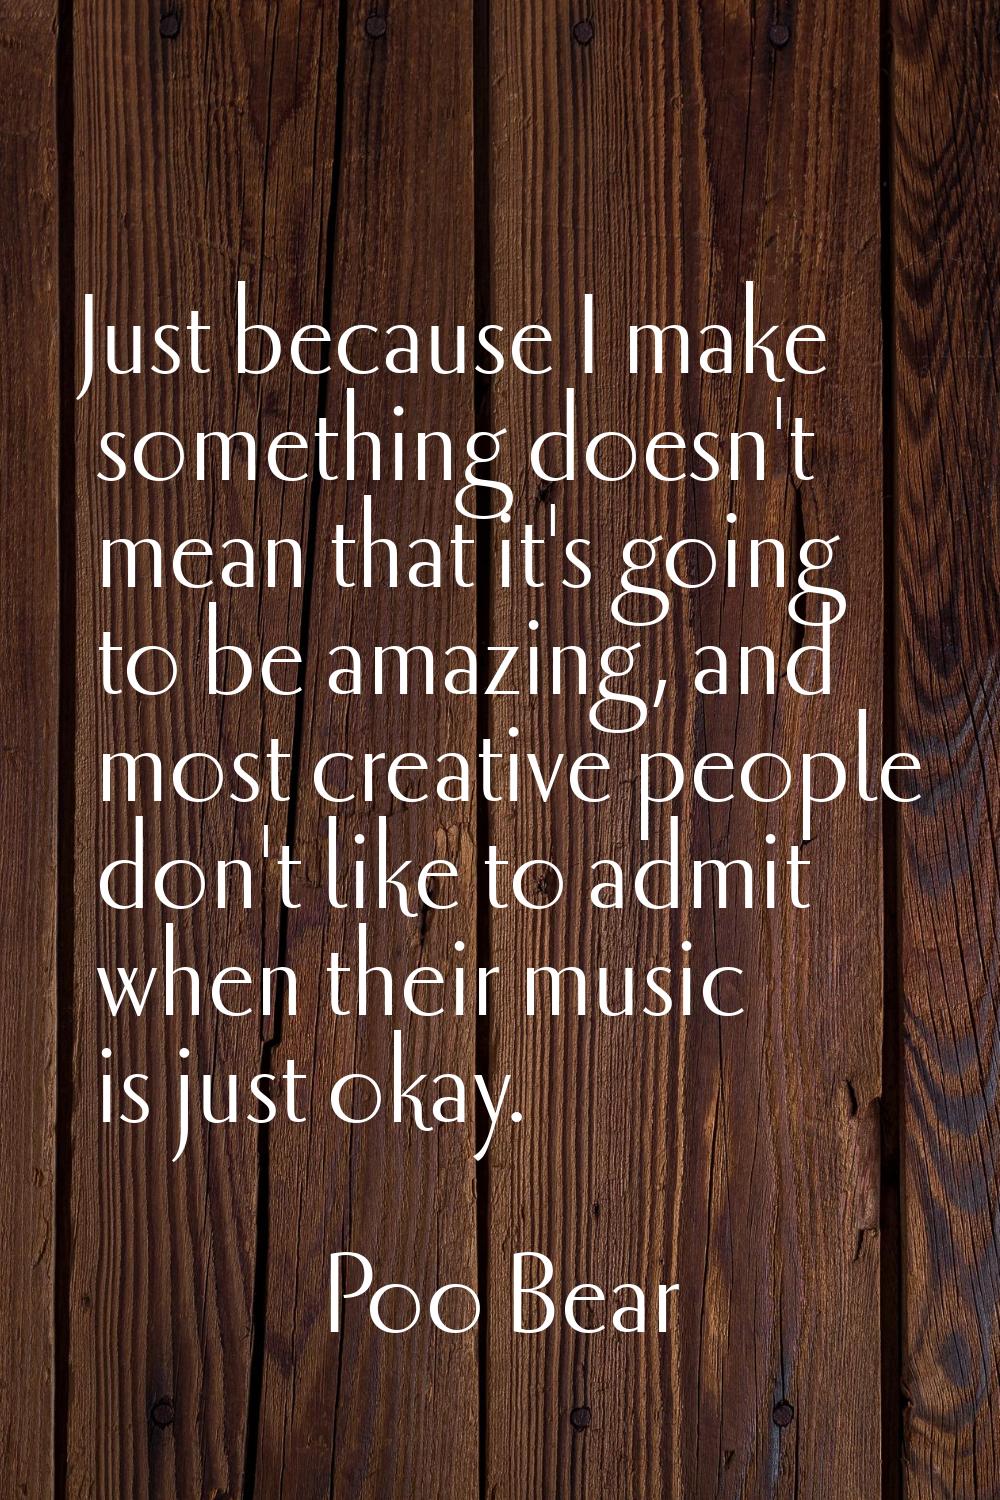 Just because I make something doesn't mean that it's going to be amazing, and most creative people 